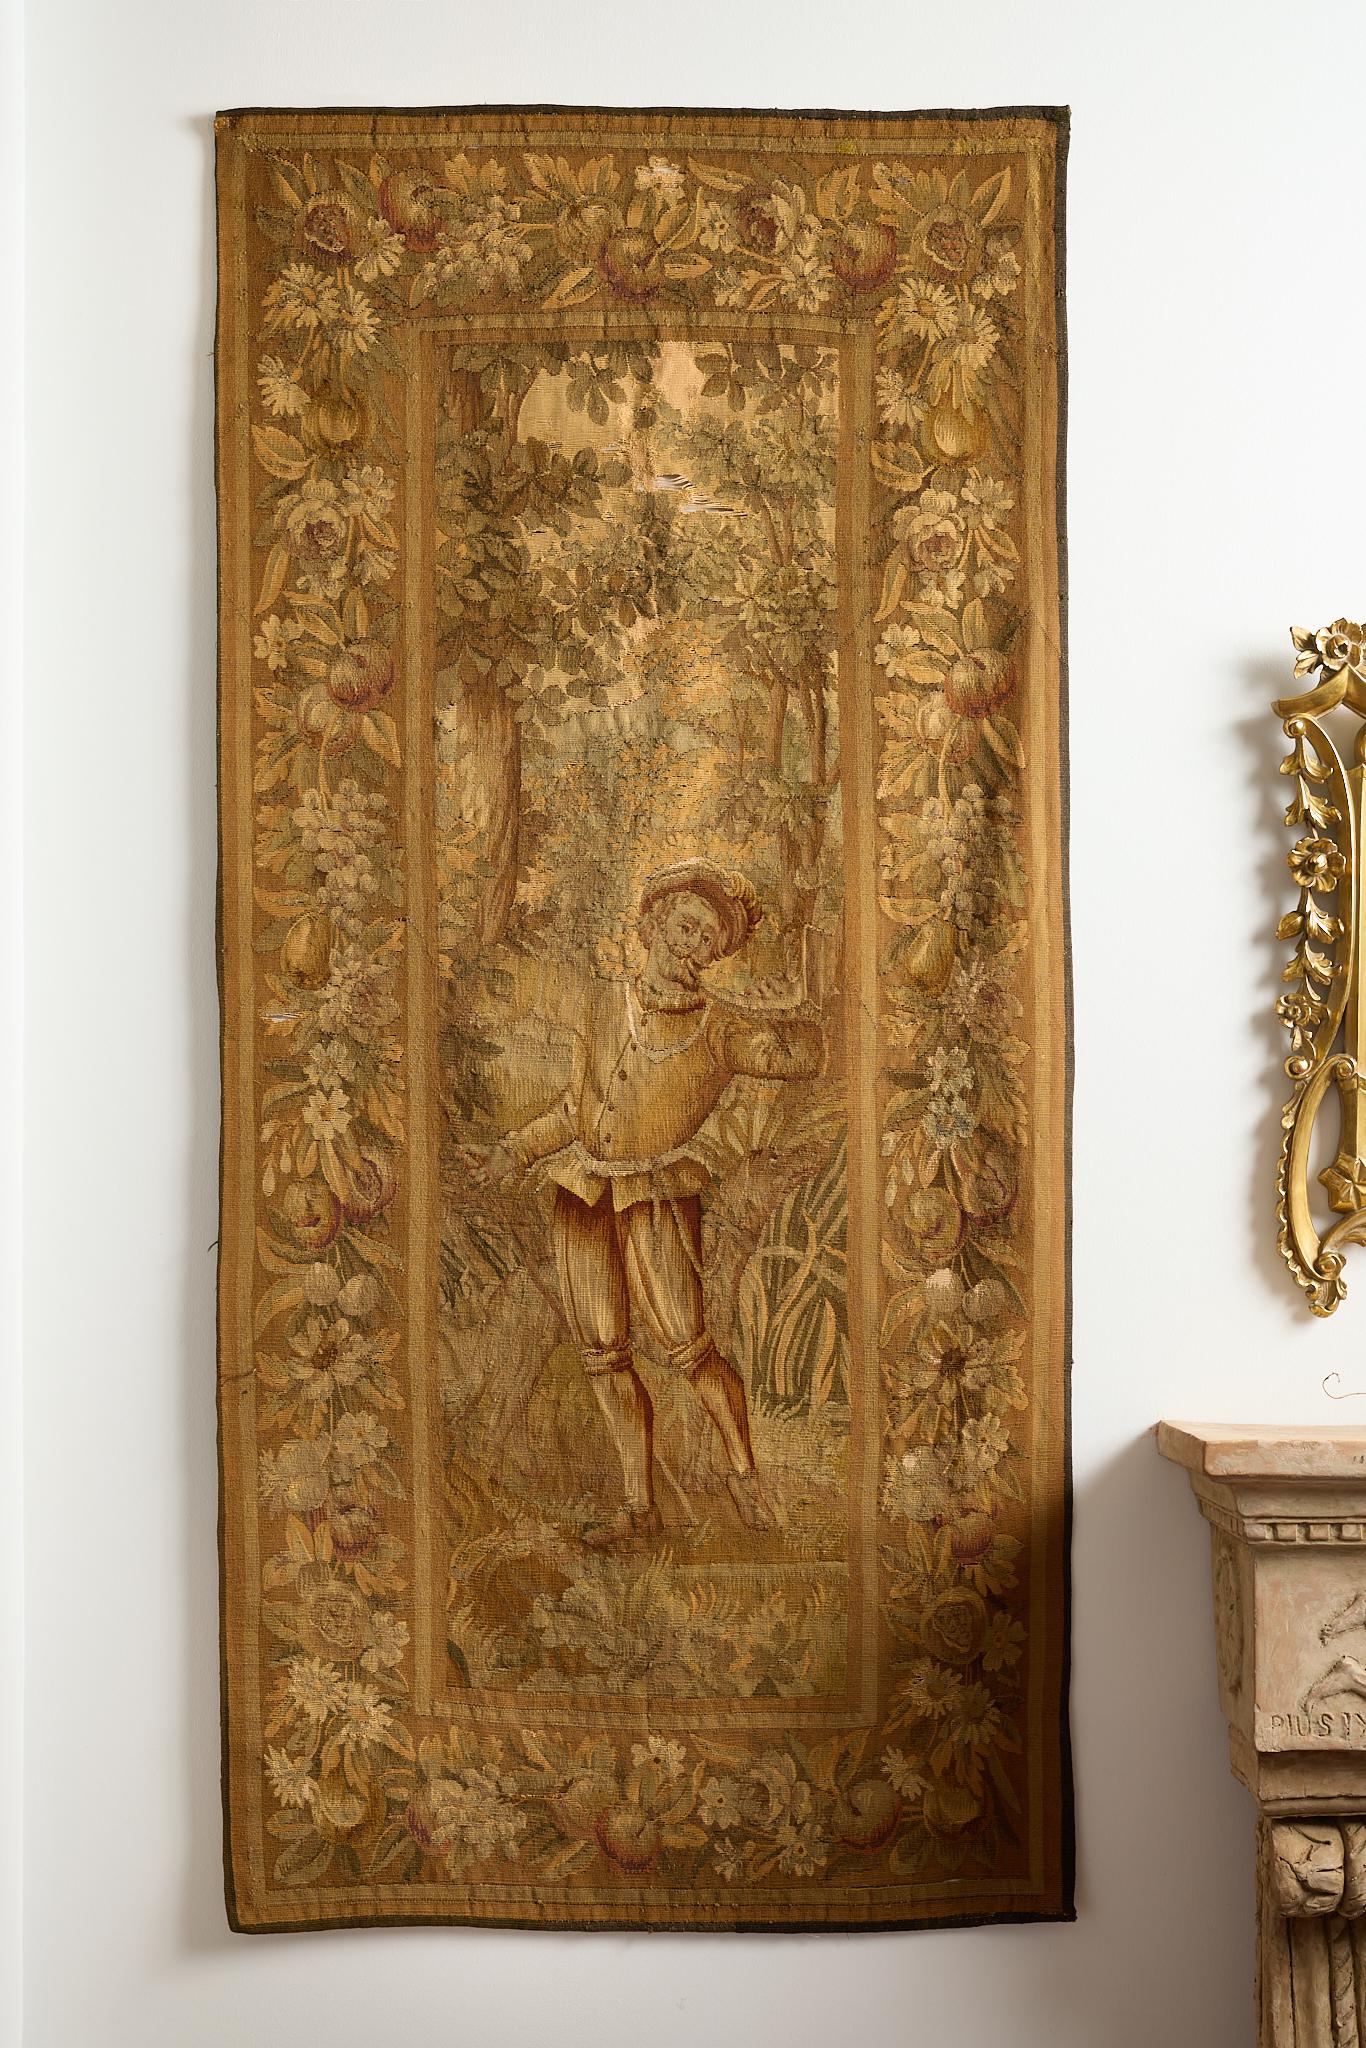 Two large, 18th century, French figural tapestries, each with a central male figure standing in nature, one blowing a hunting horn and one with his arm raised in a searching gesture. Both with a frame of fruits and flowers. 
These tapestries have